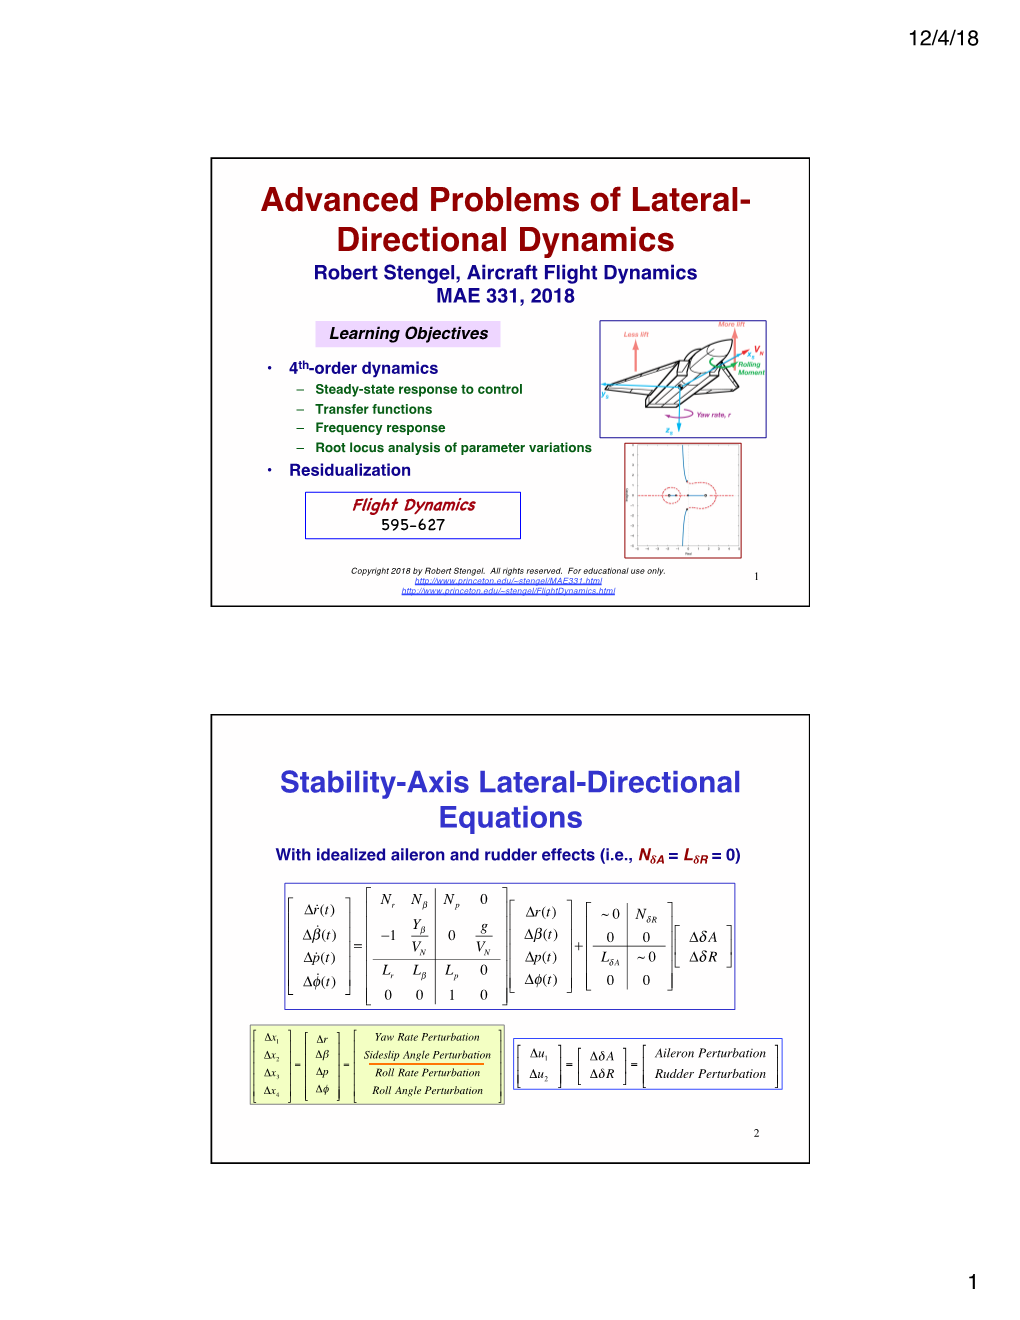 Advanced Problems of Lateral-Directional Dynamics